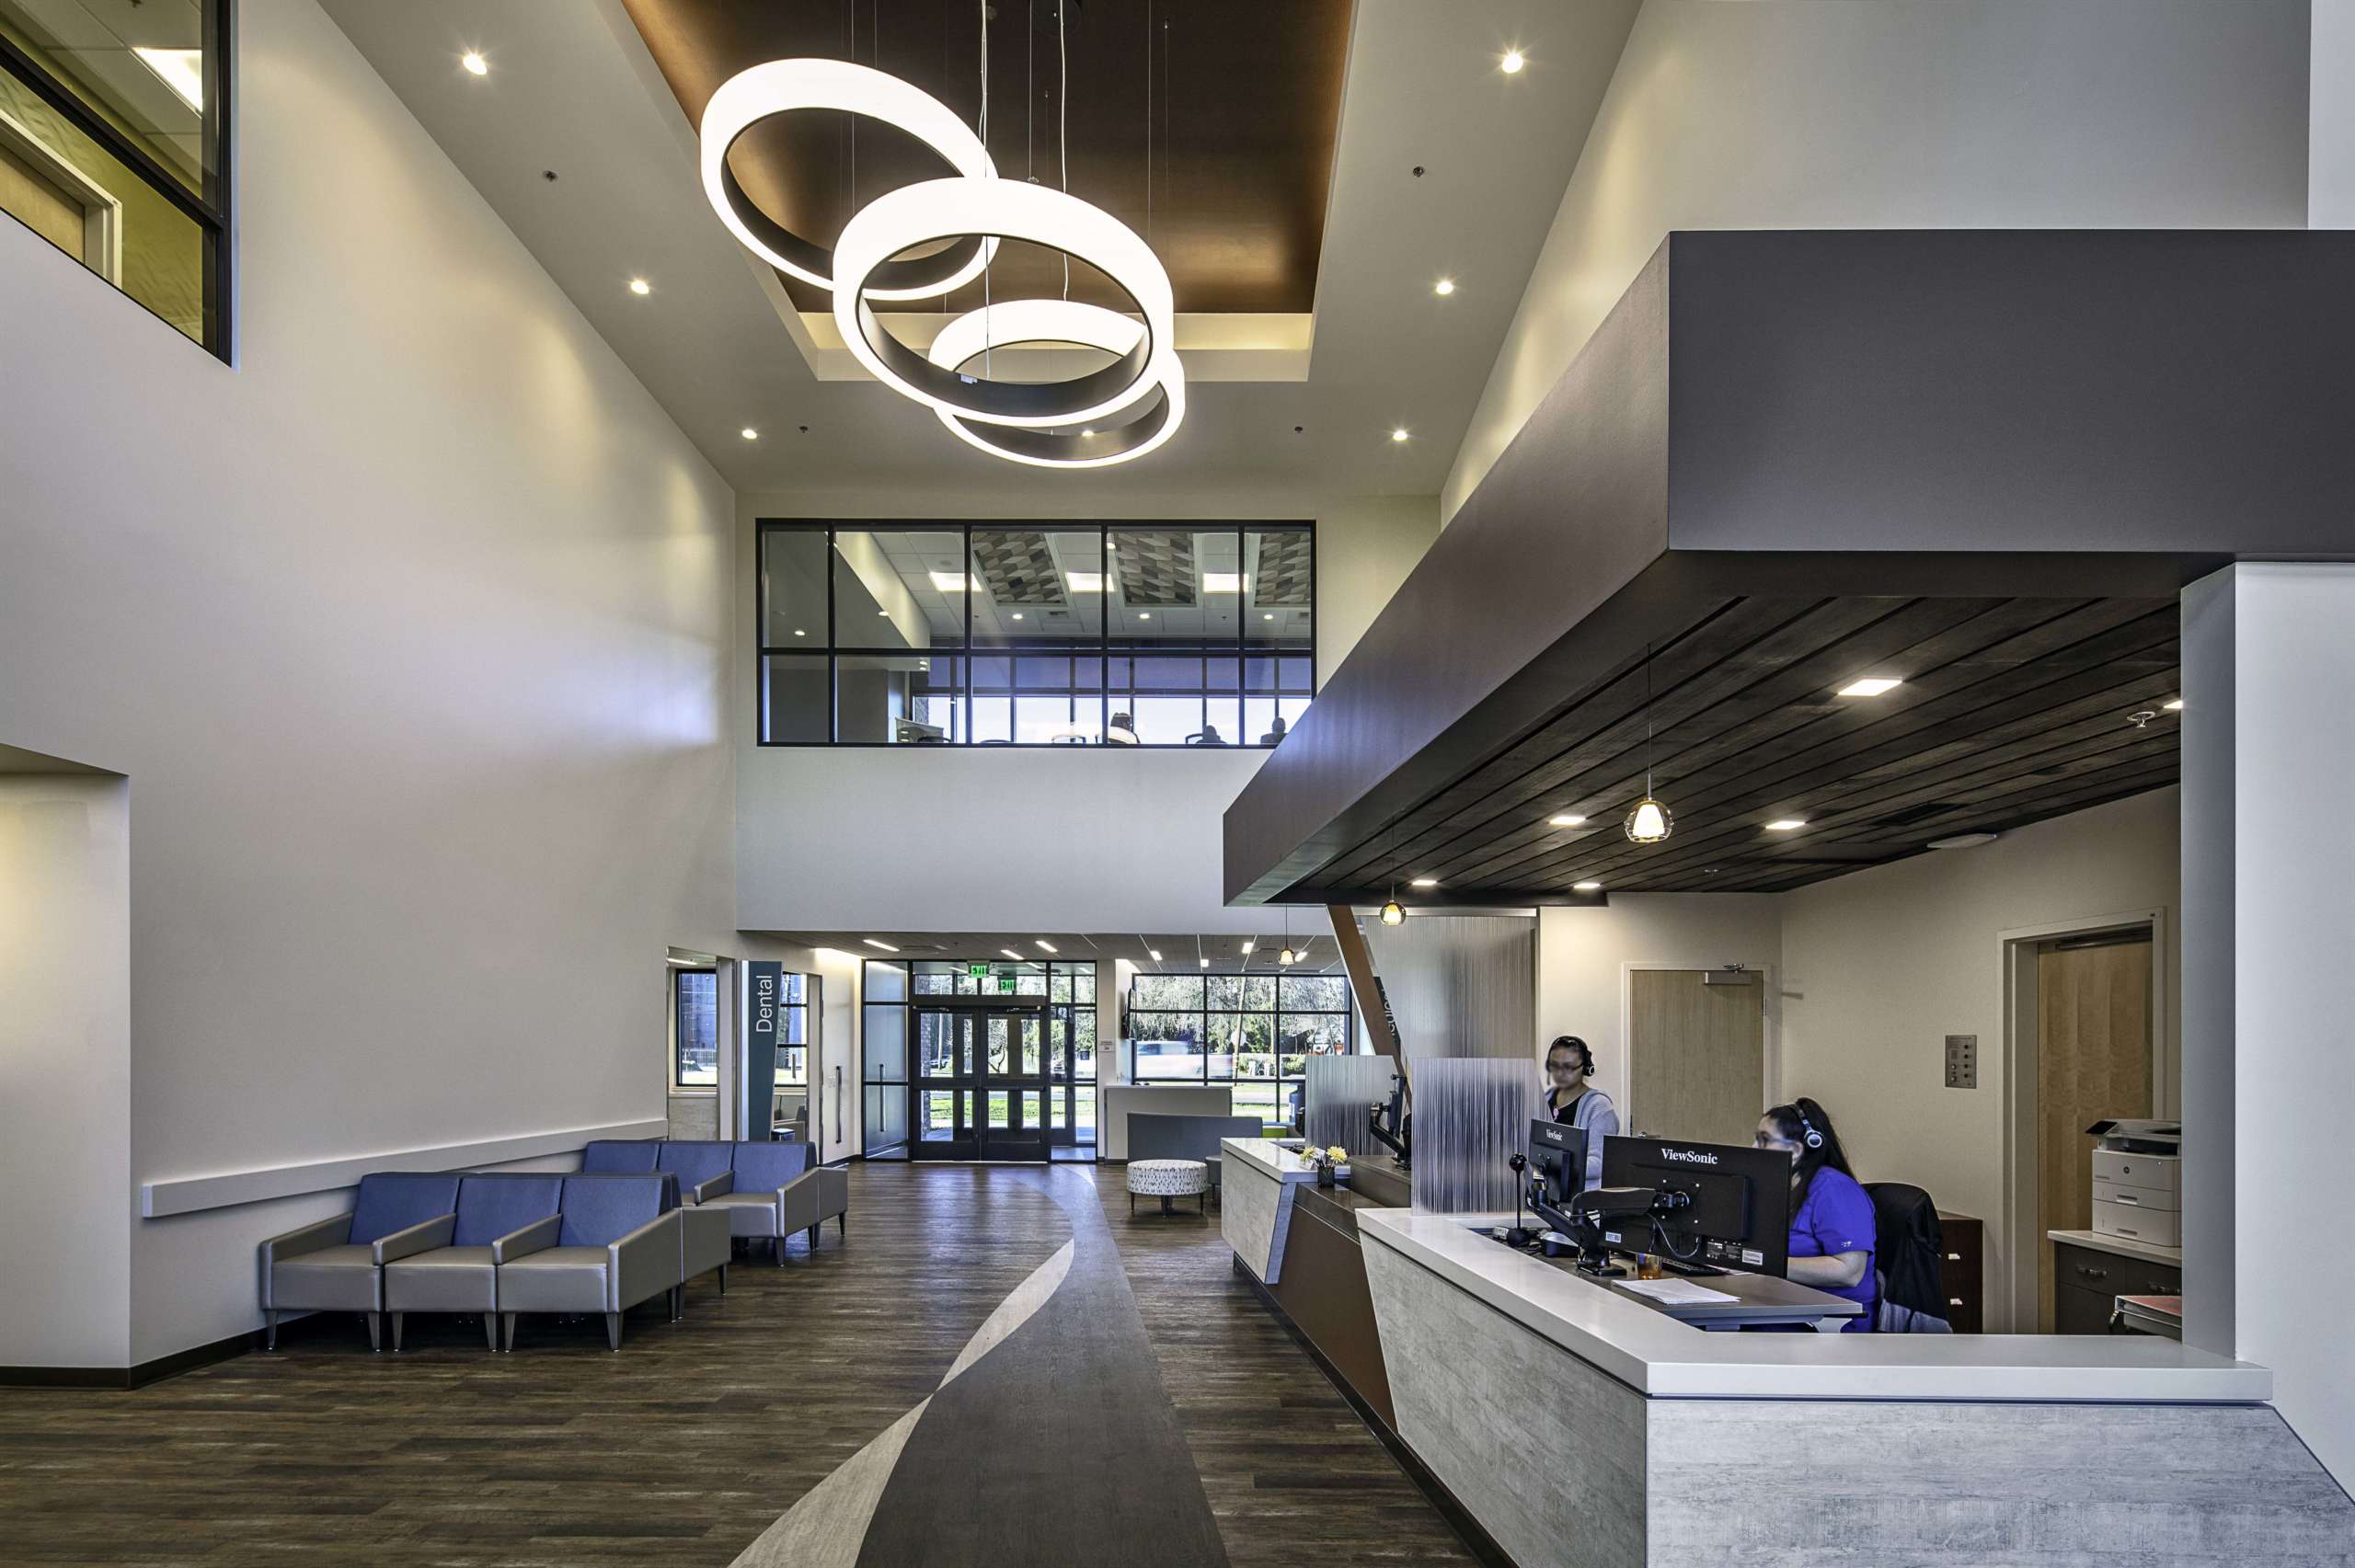 Lobby with waiting area and front desk at the Winters Healthcare Community Health Center